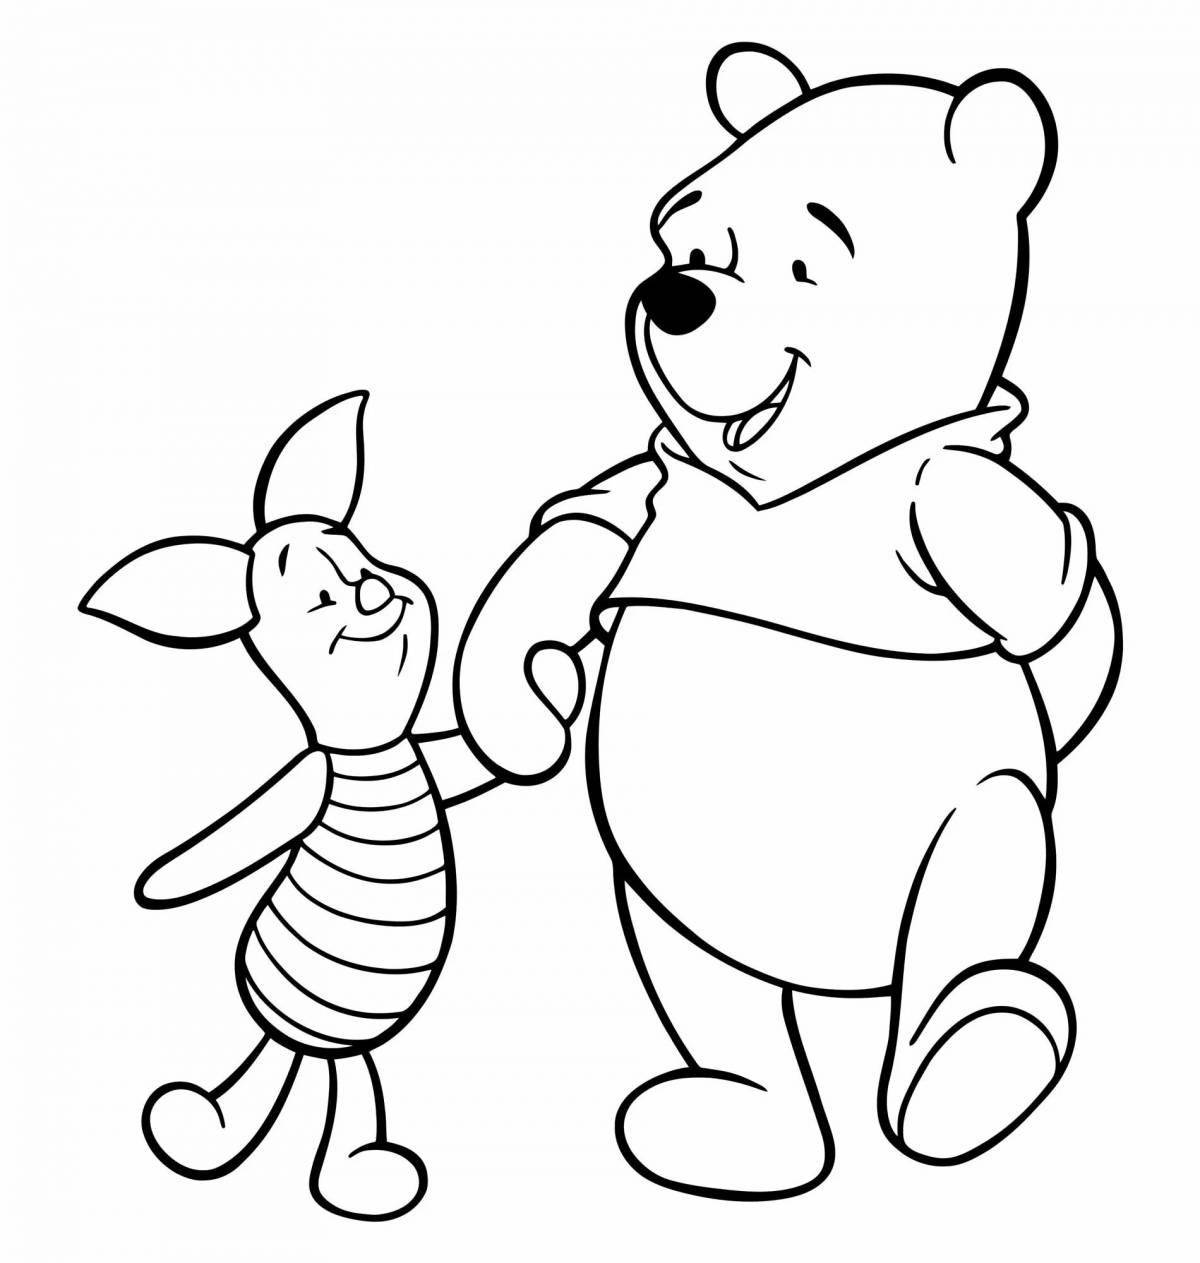 Coloring book with adorable cartoon characters for 5-6 year olds